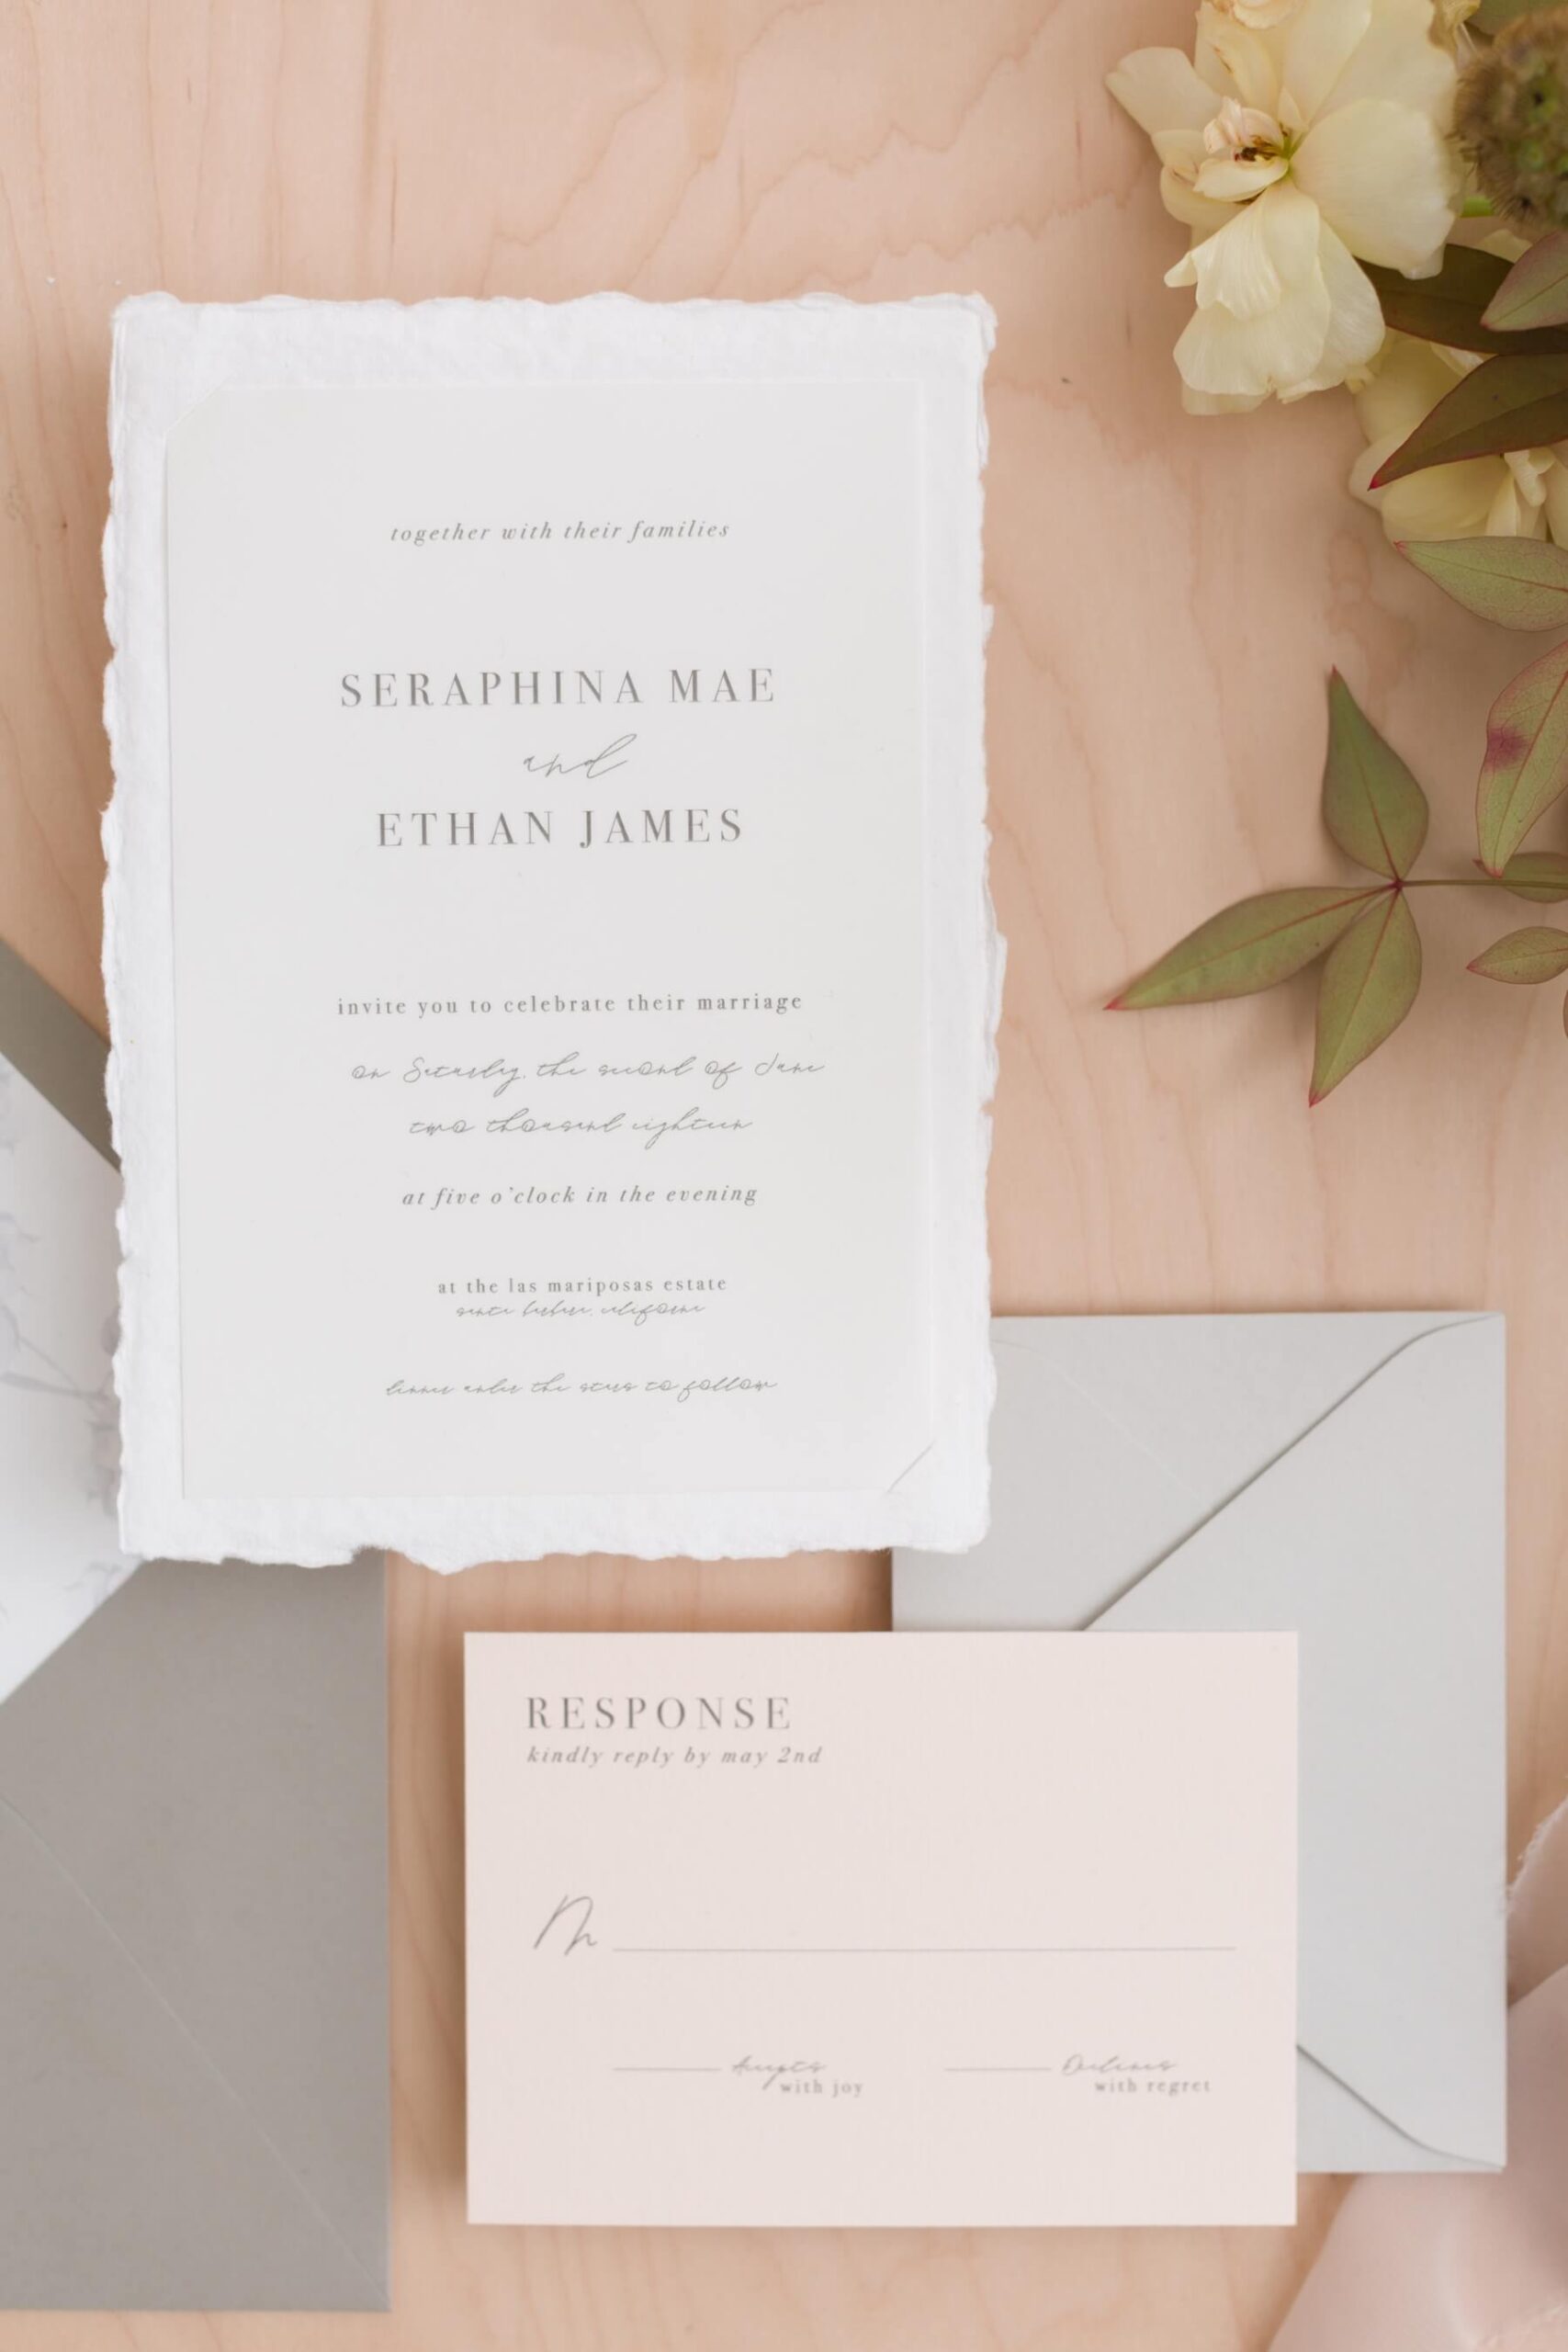 Wedding invitation with RSVP questions on RVSP card